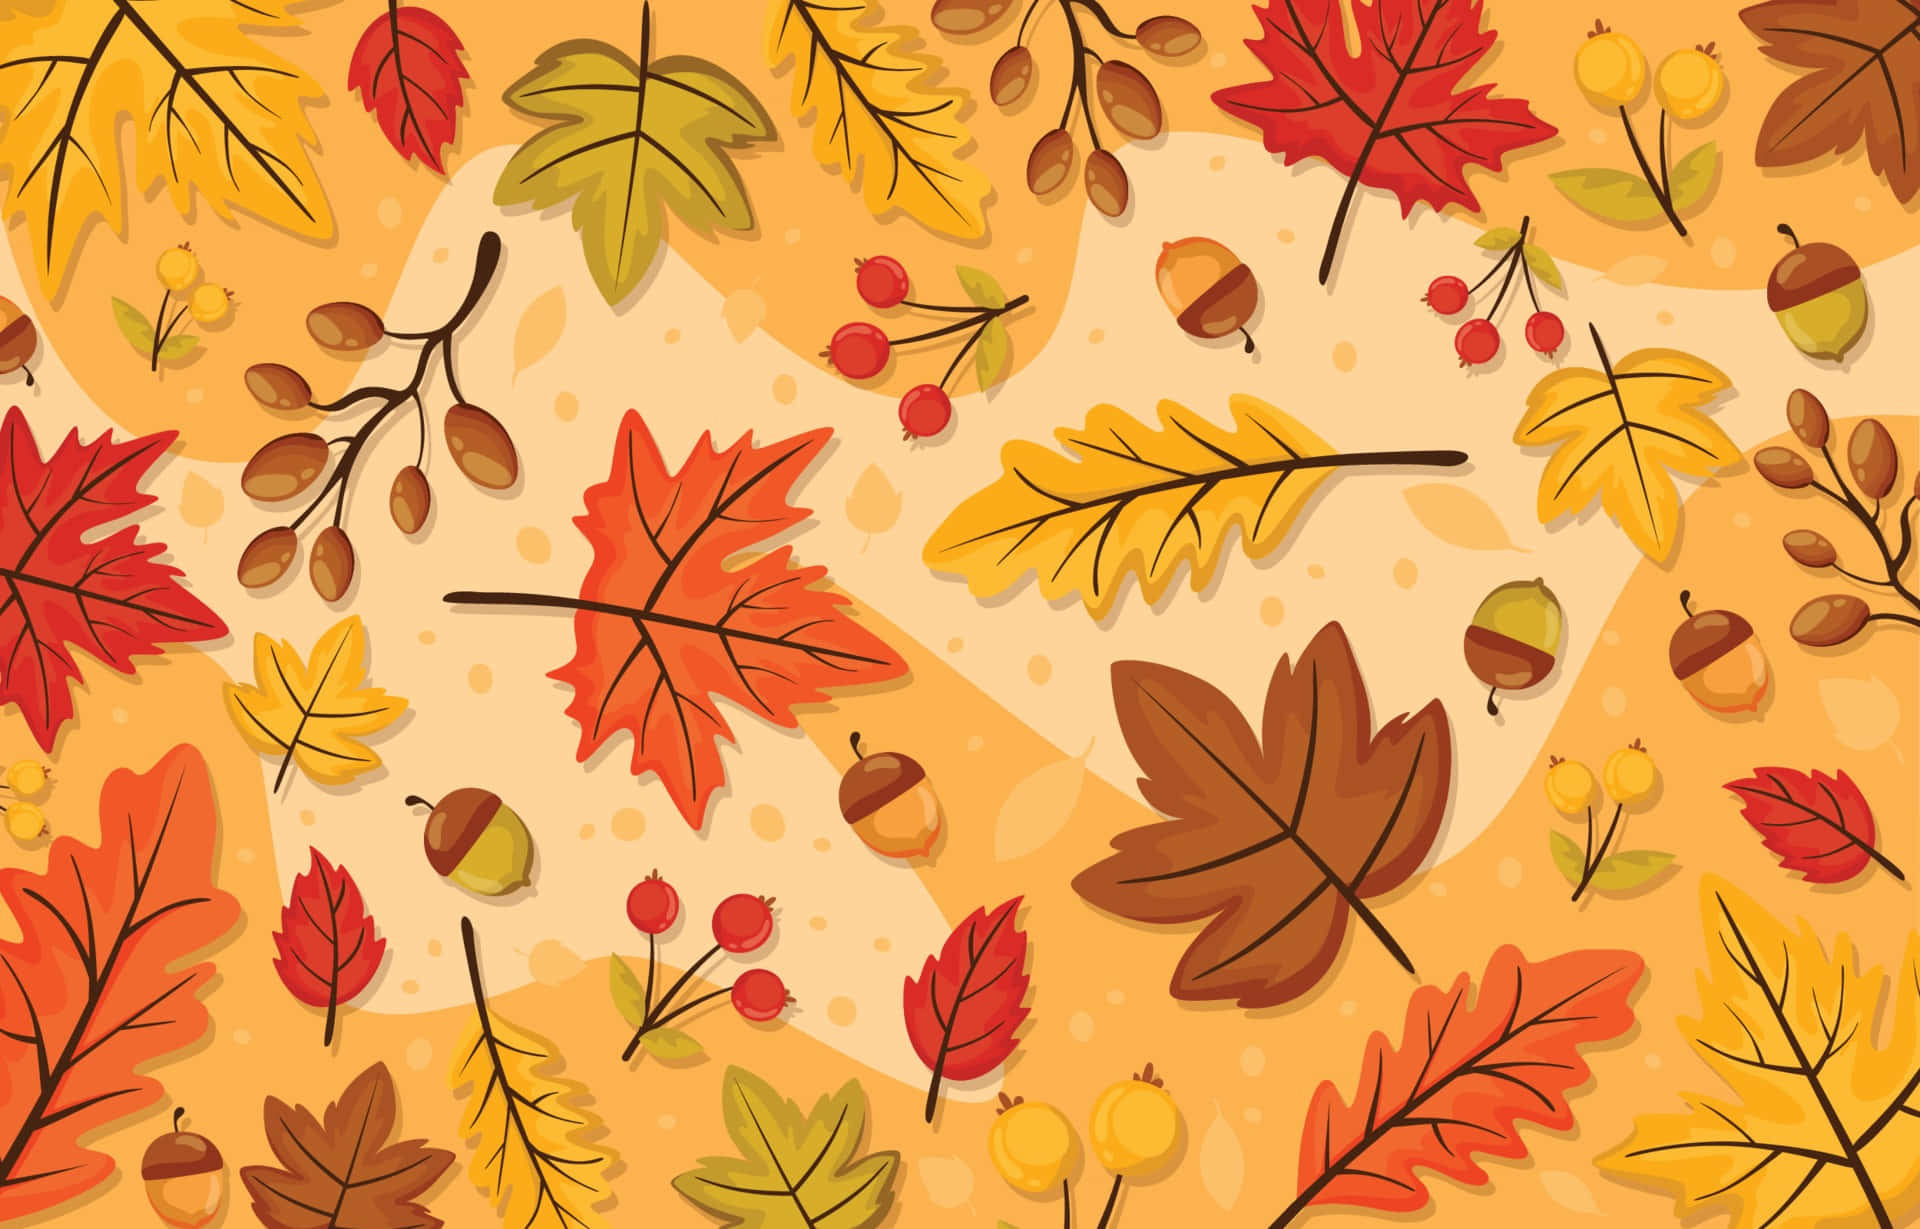 Enjoy the season of serenity and magic with this beautiful fall leaf!